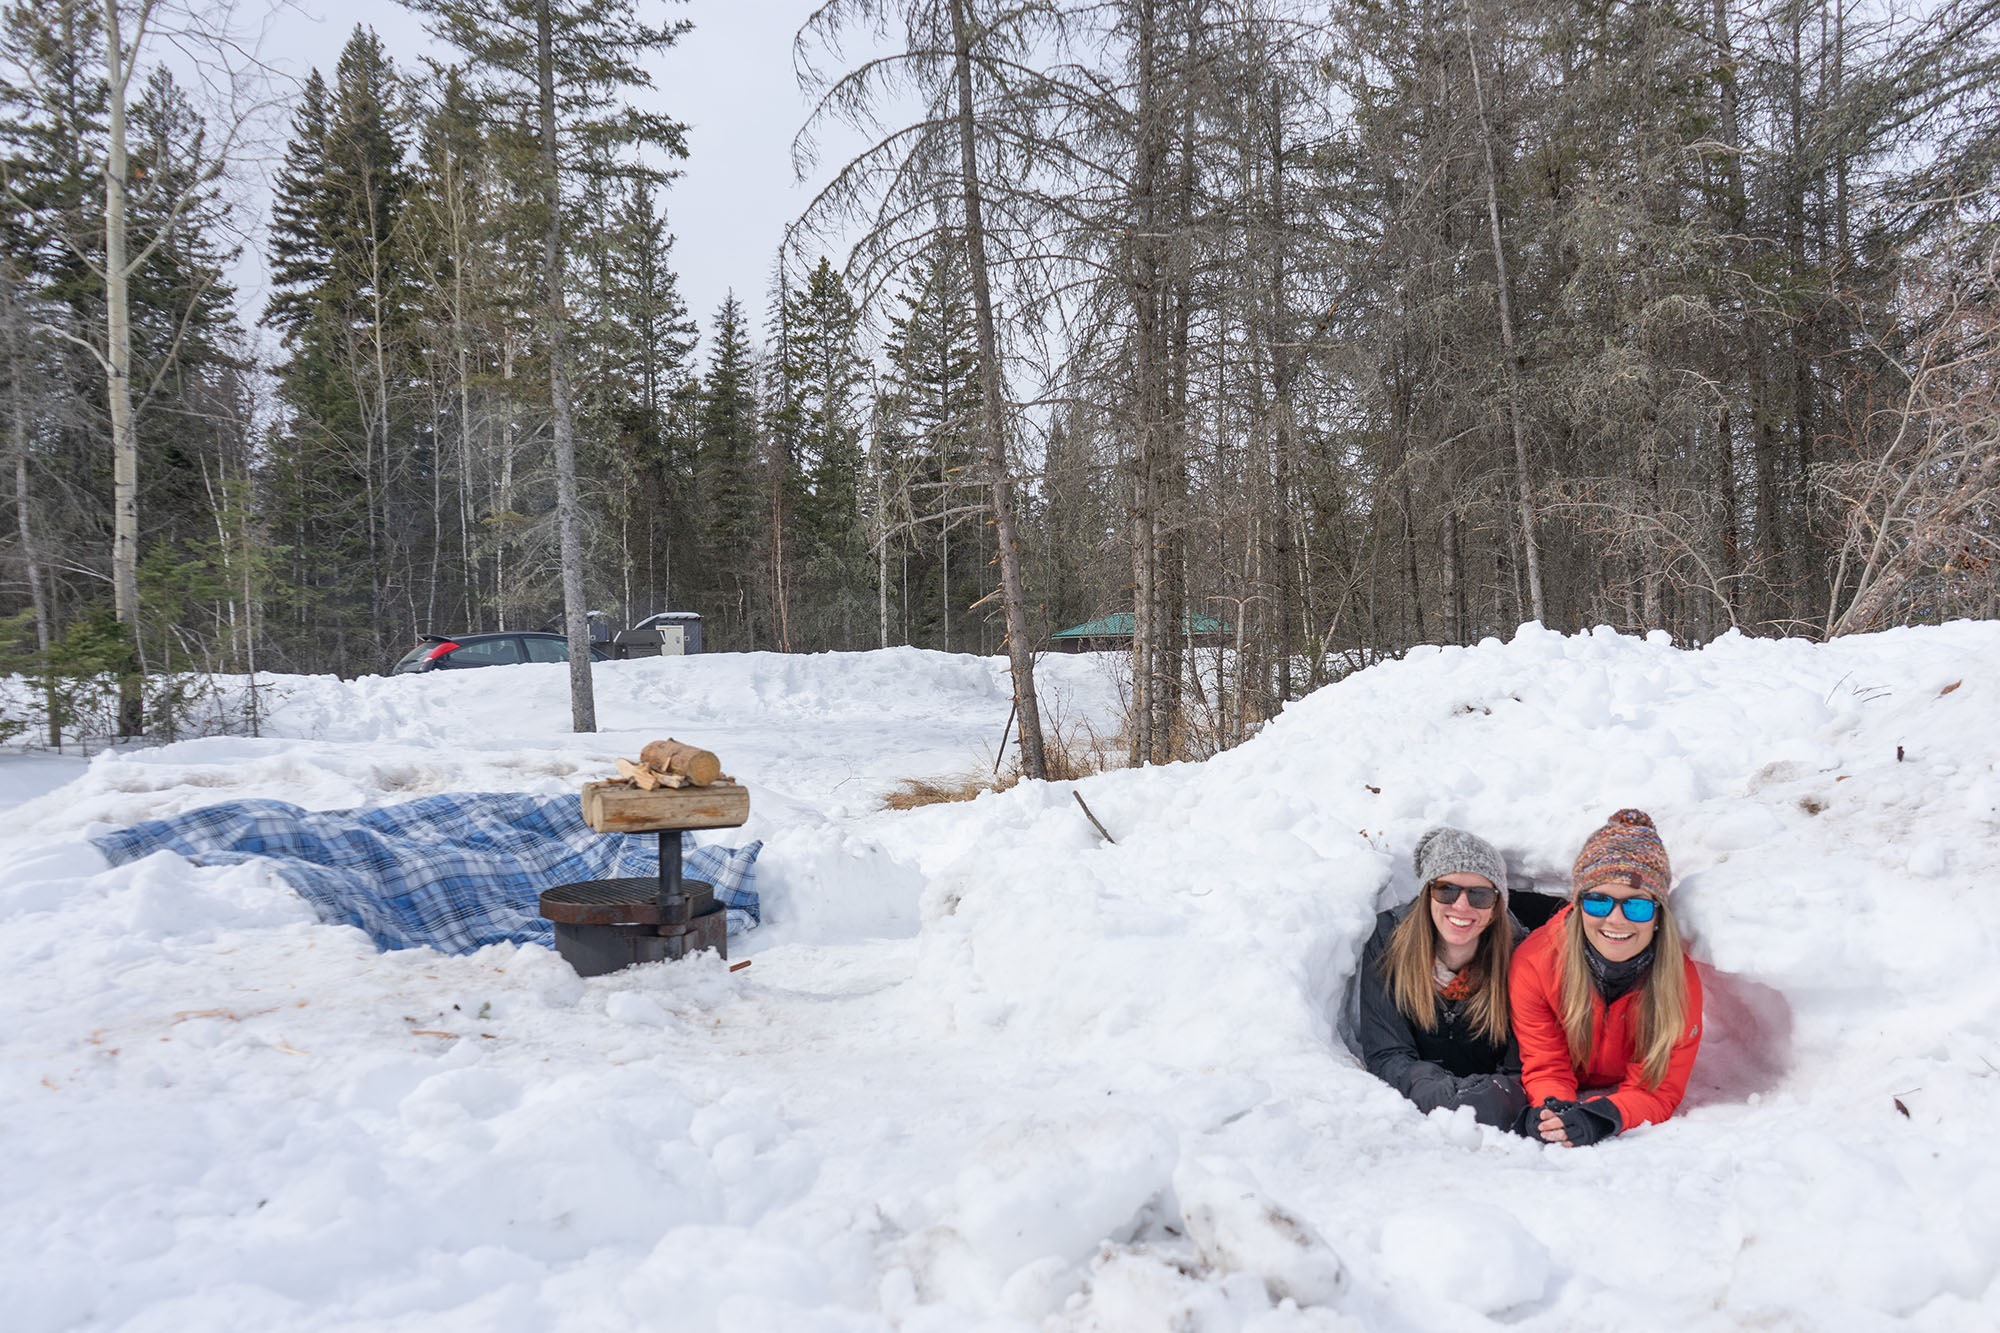 How to Build a Quinzee (and Stay Warm Outside no Matter the